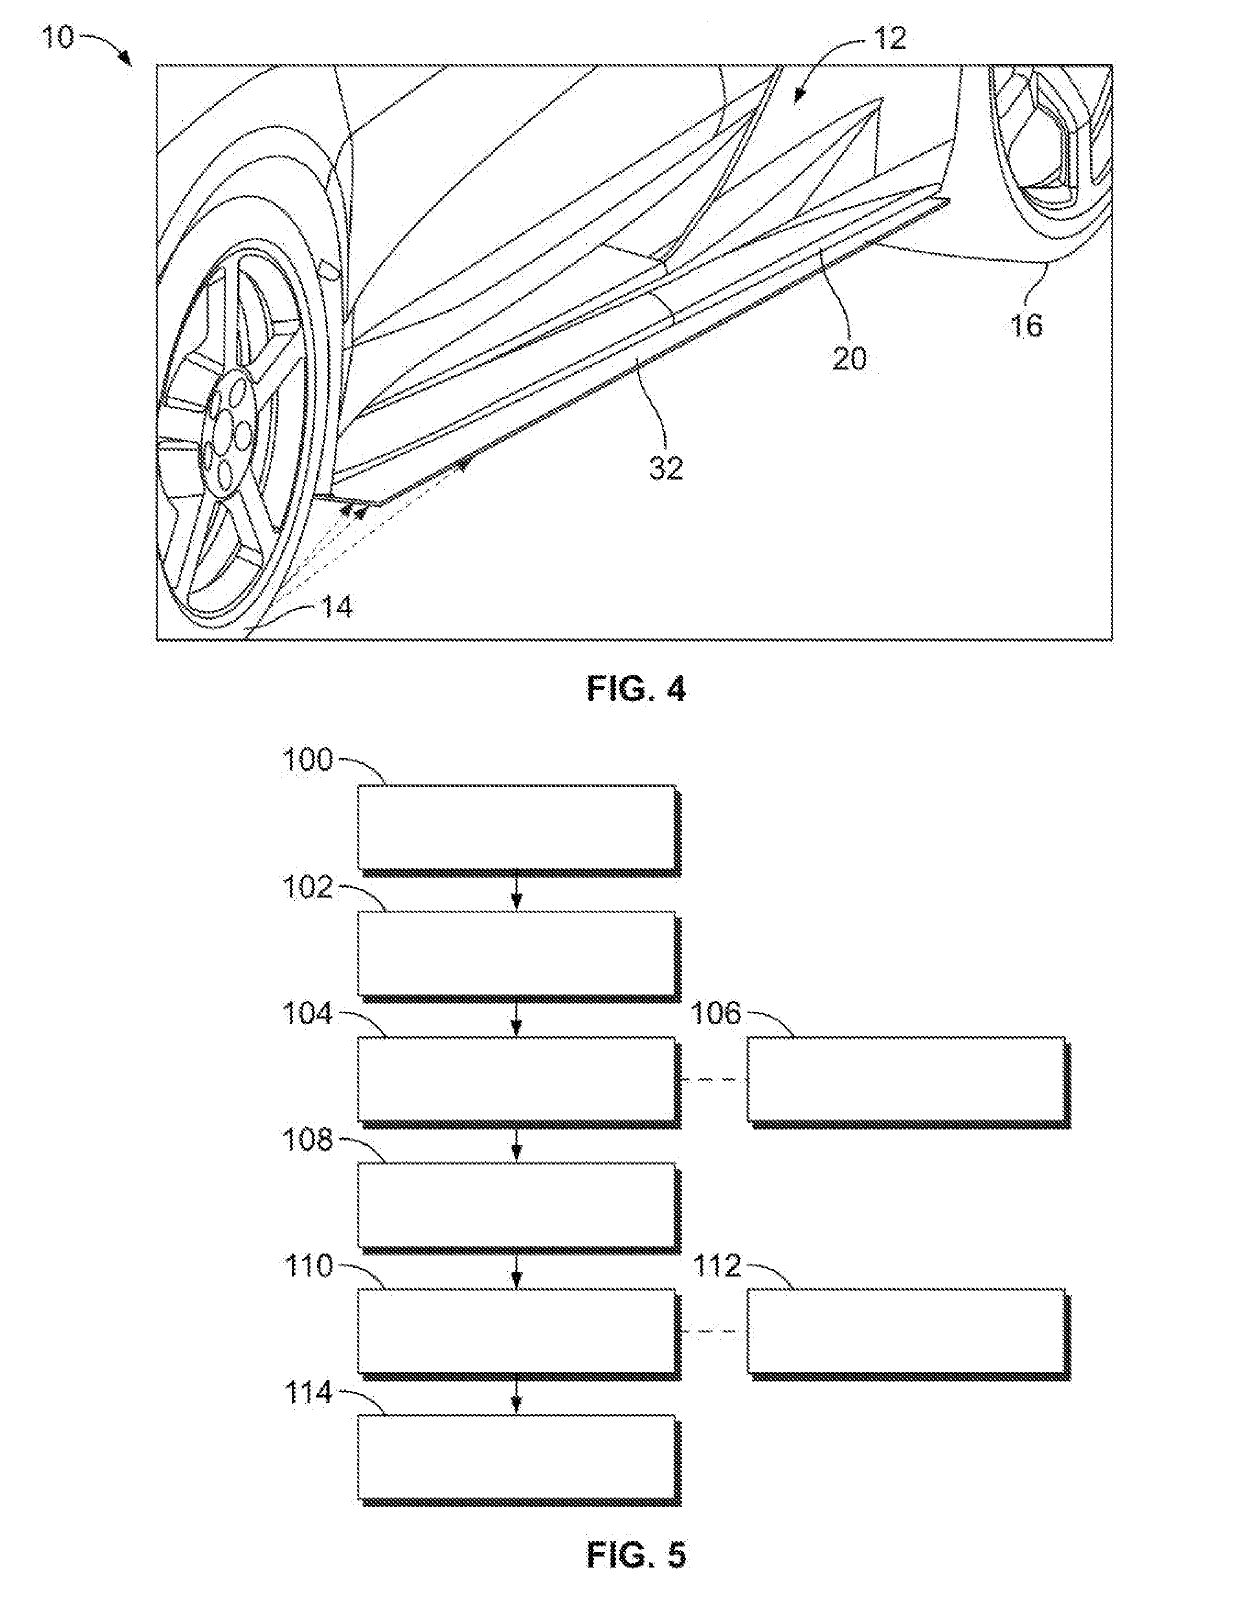 Deployable debris protection device for an automotive vehicle